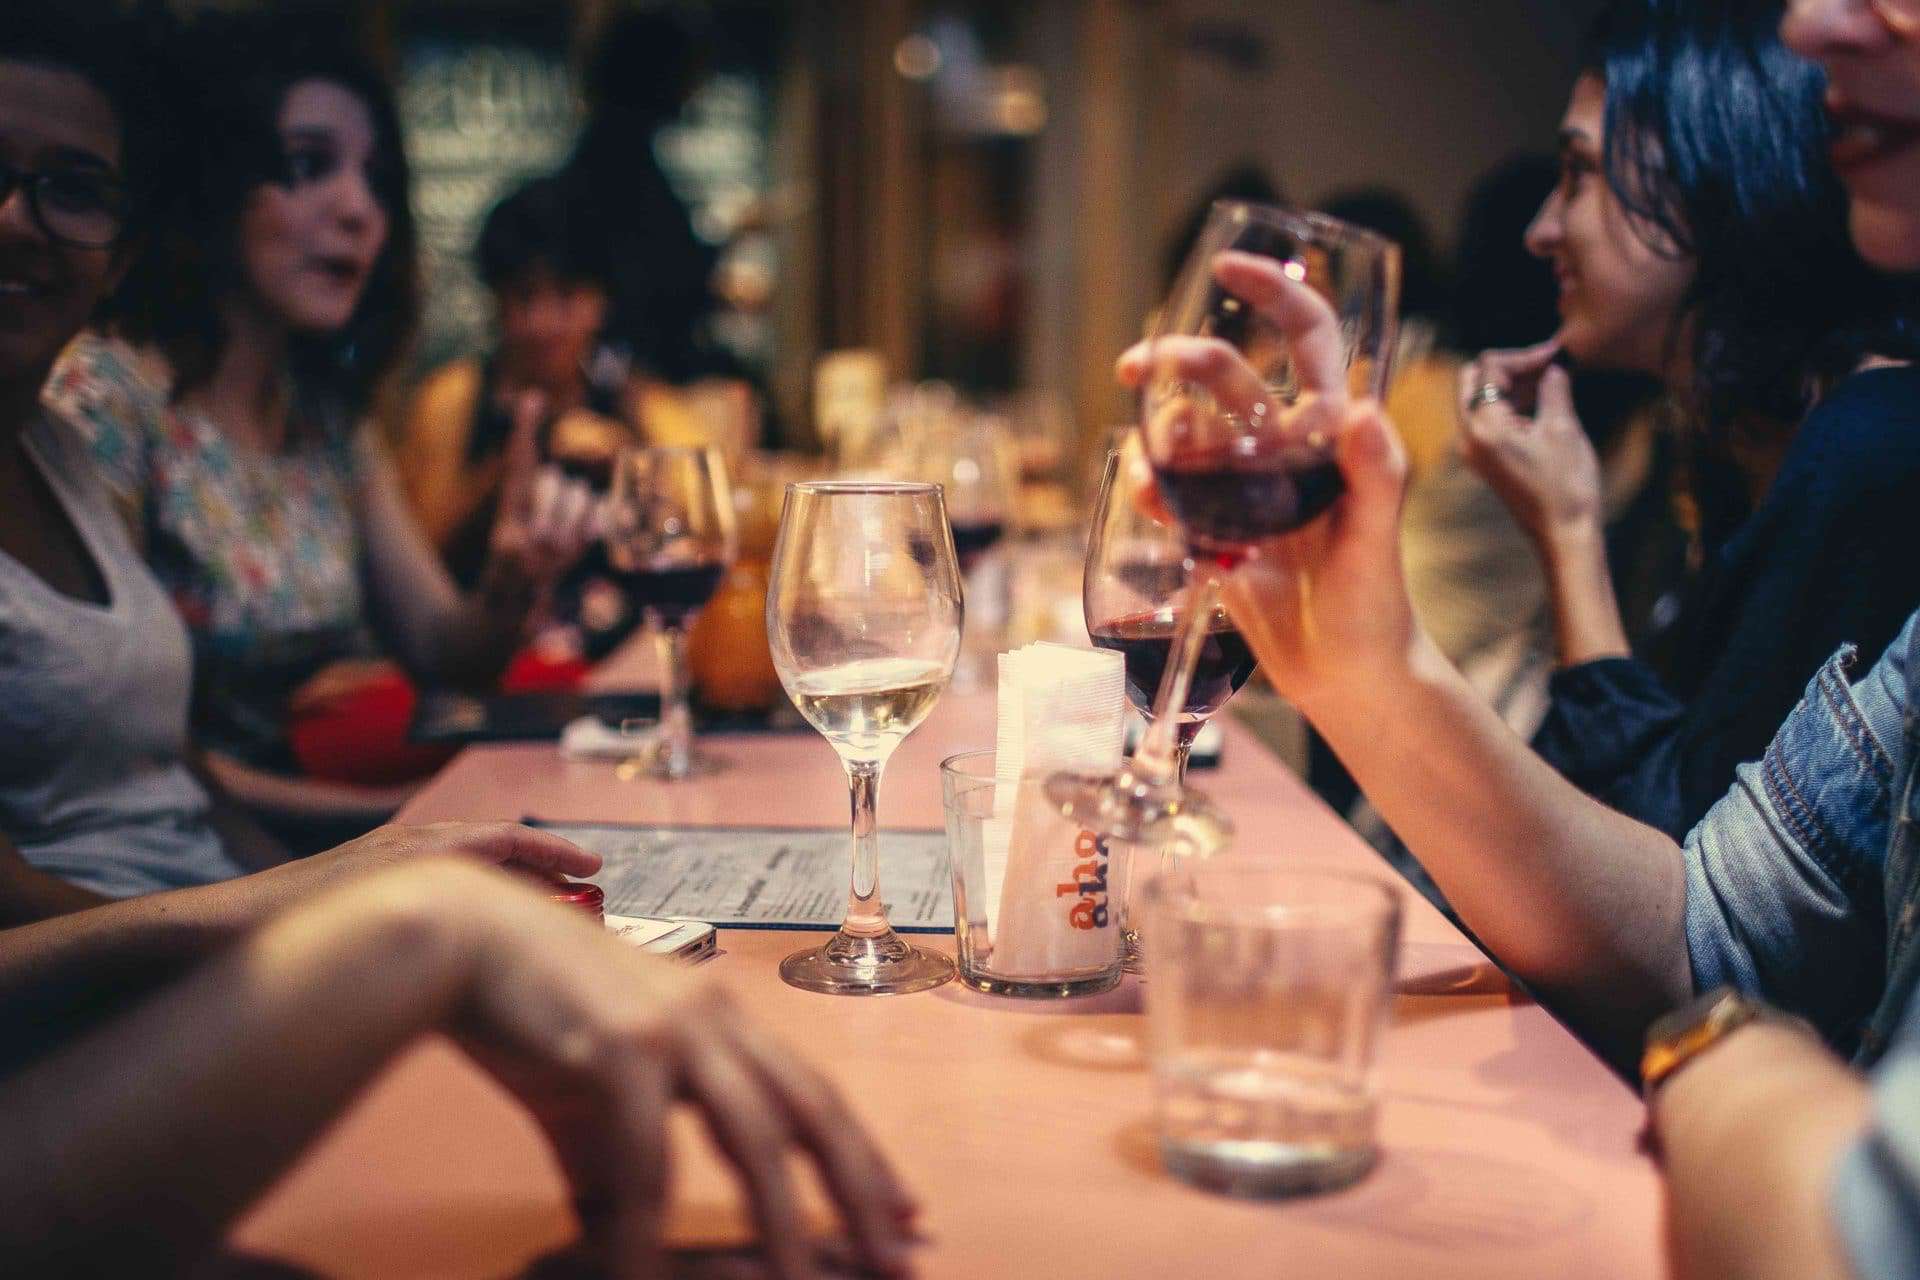 People drink wine at a dinner table, showing the personal level at which consumerism could affect us